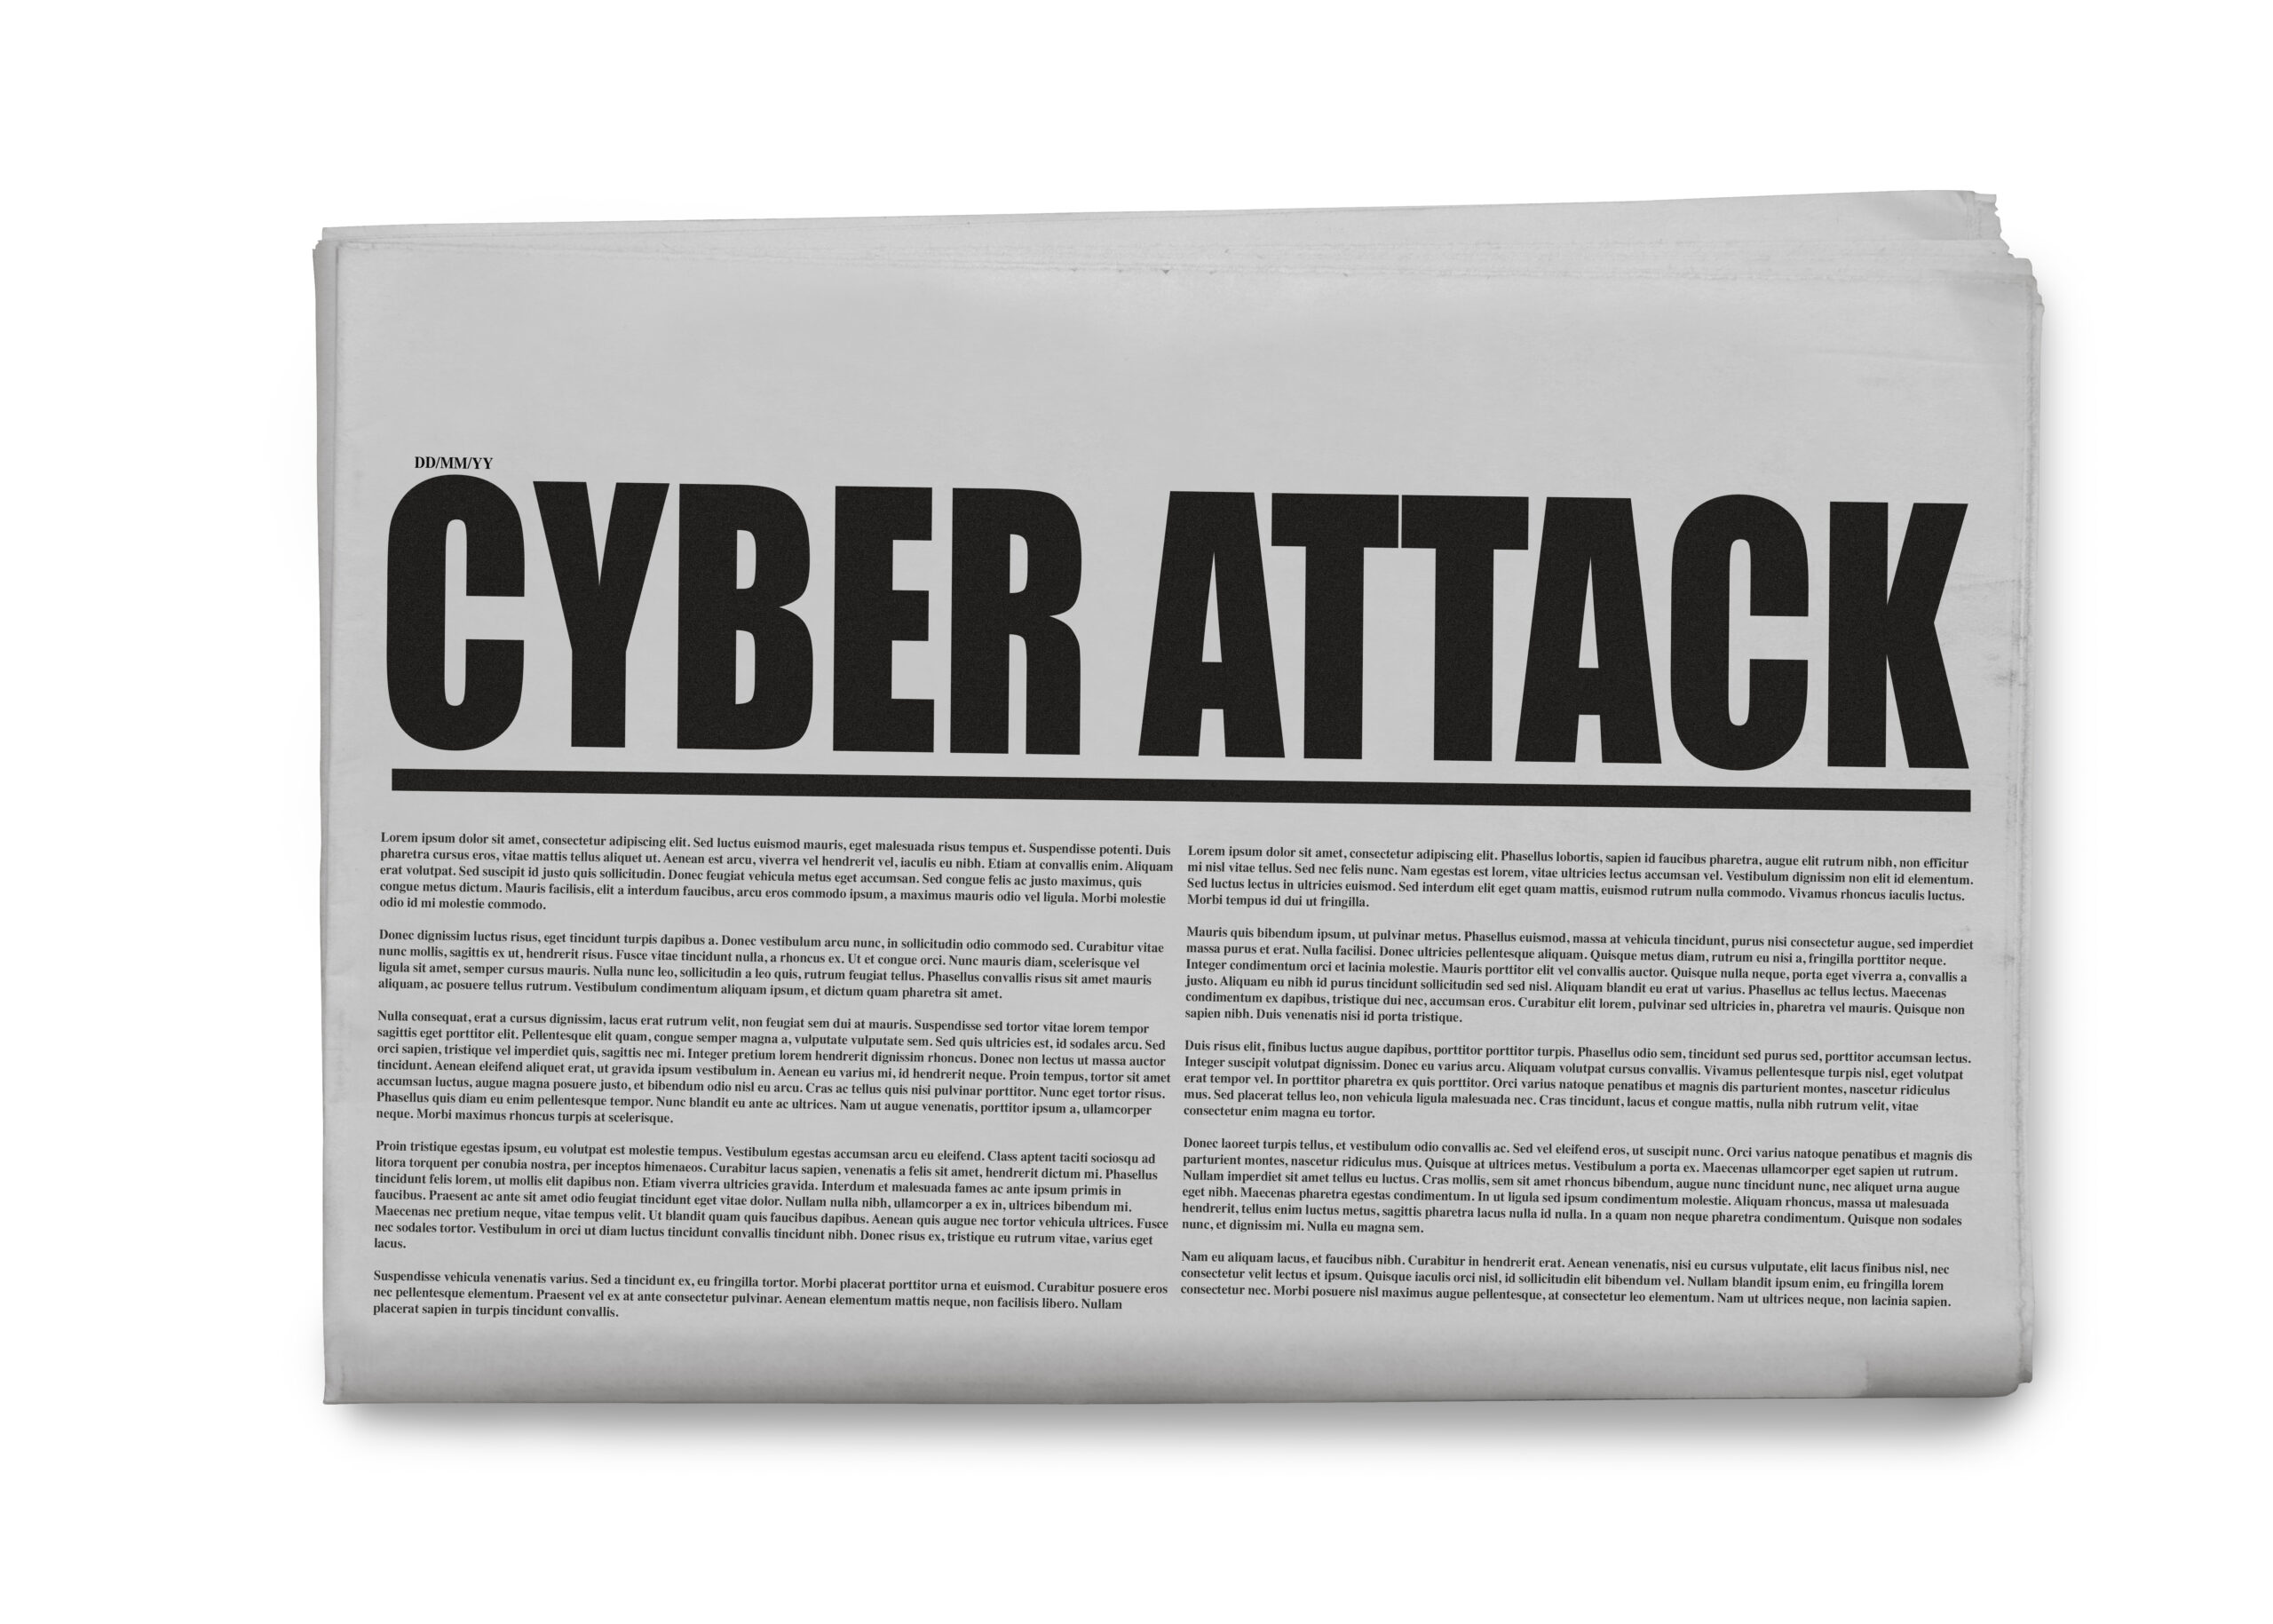 A newspaper reporting on a cyber attack as hackers snatch access tokens during Rollbar's devastating data breach.